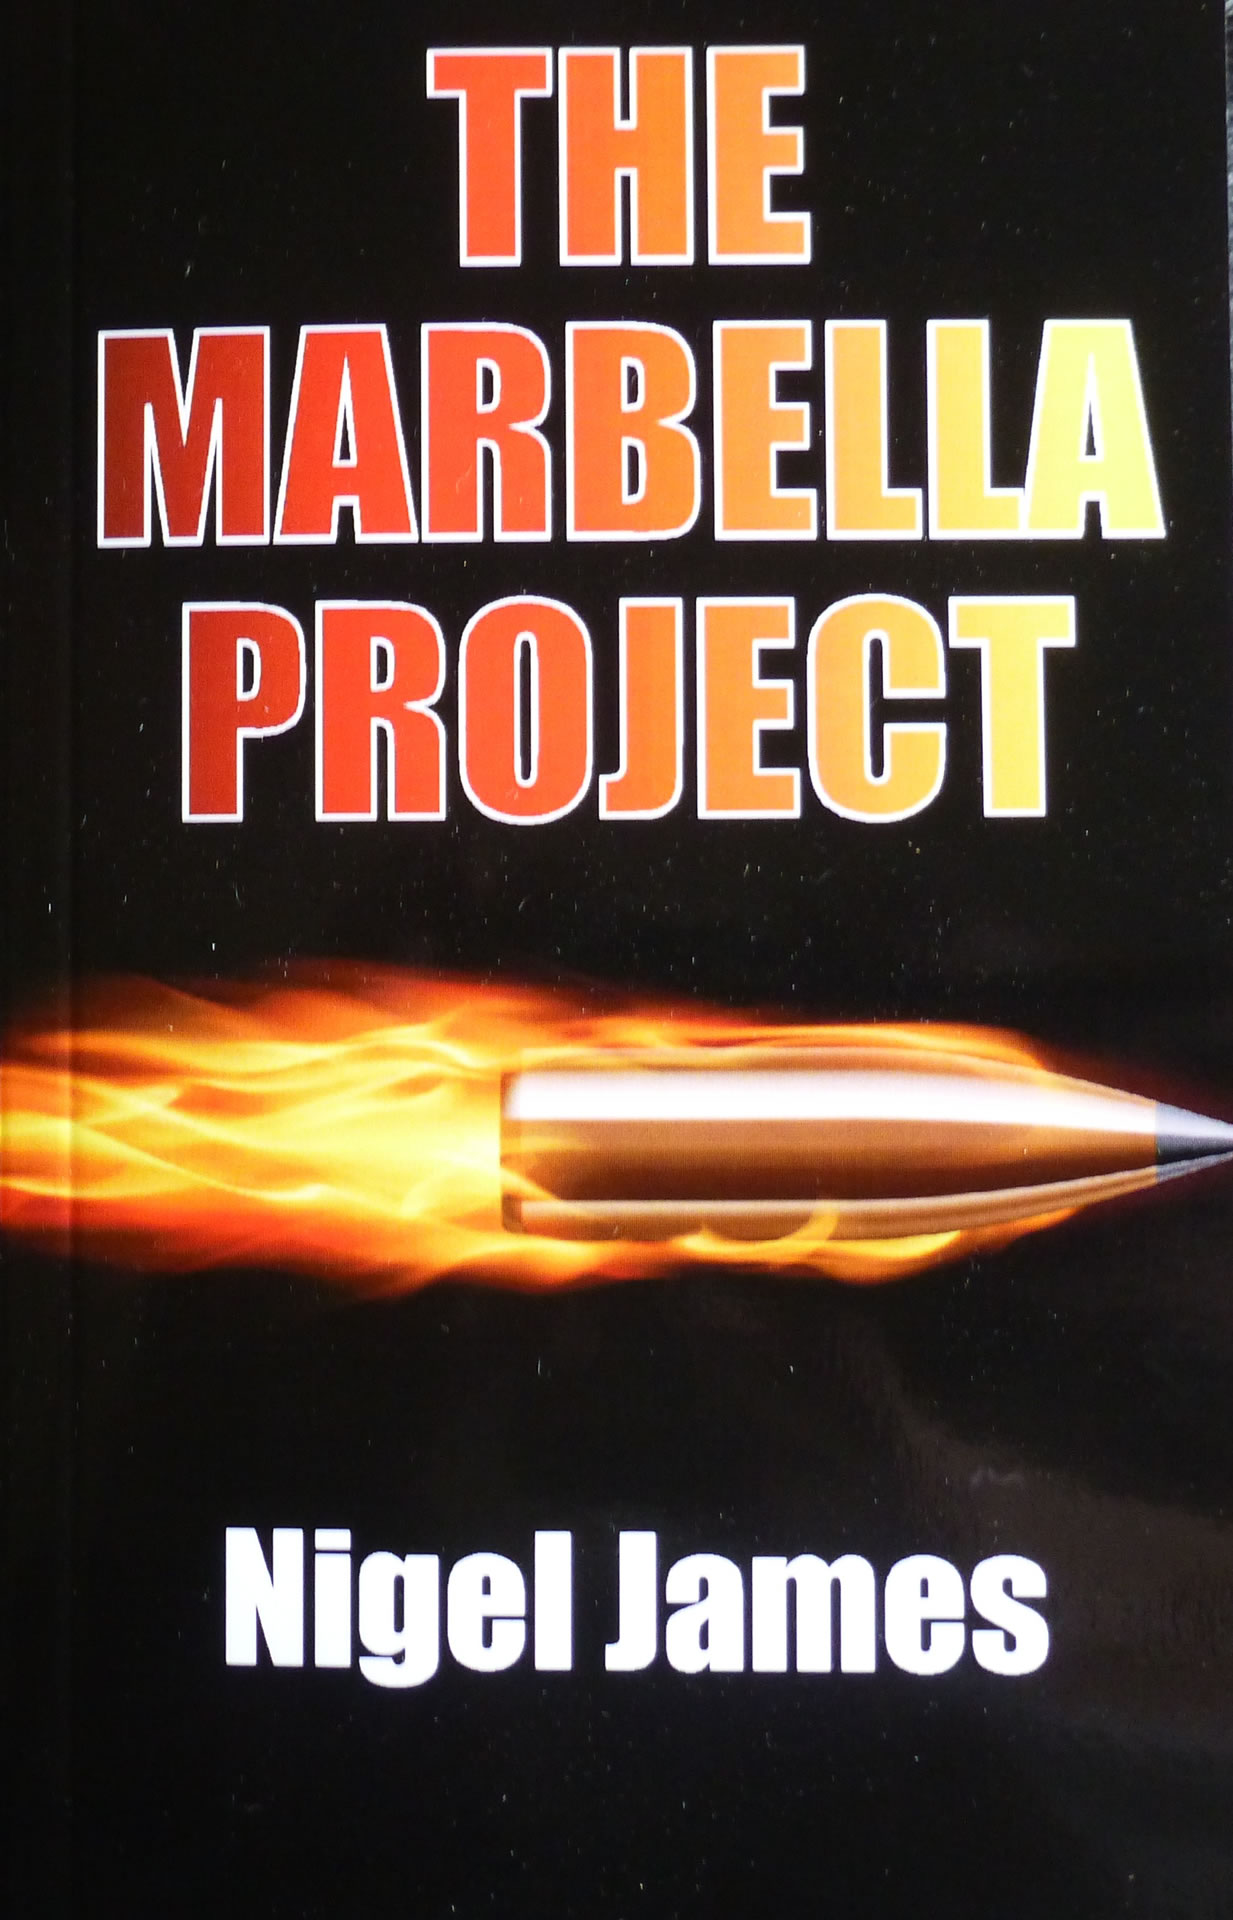 The Marbella Project by Nigel James